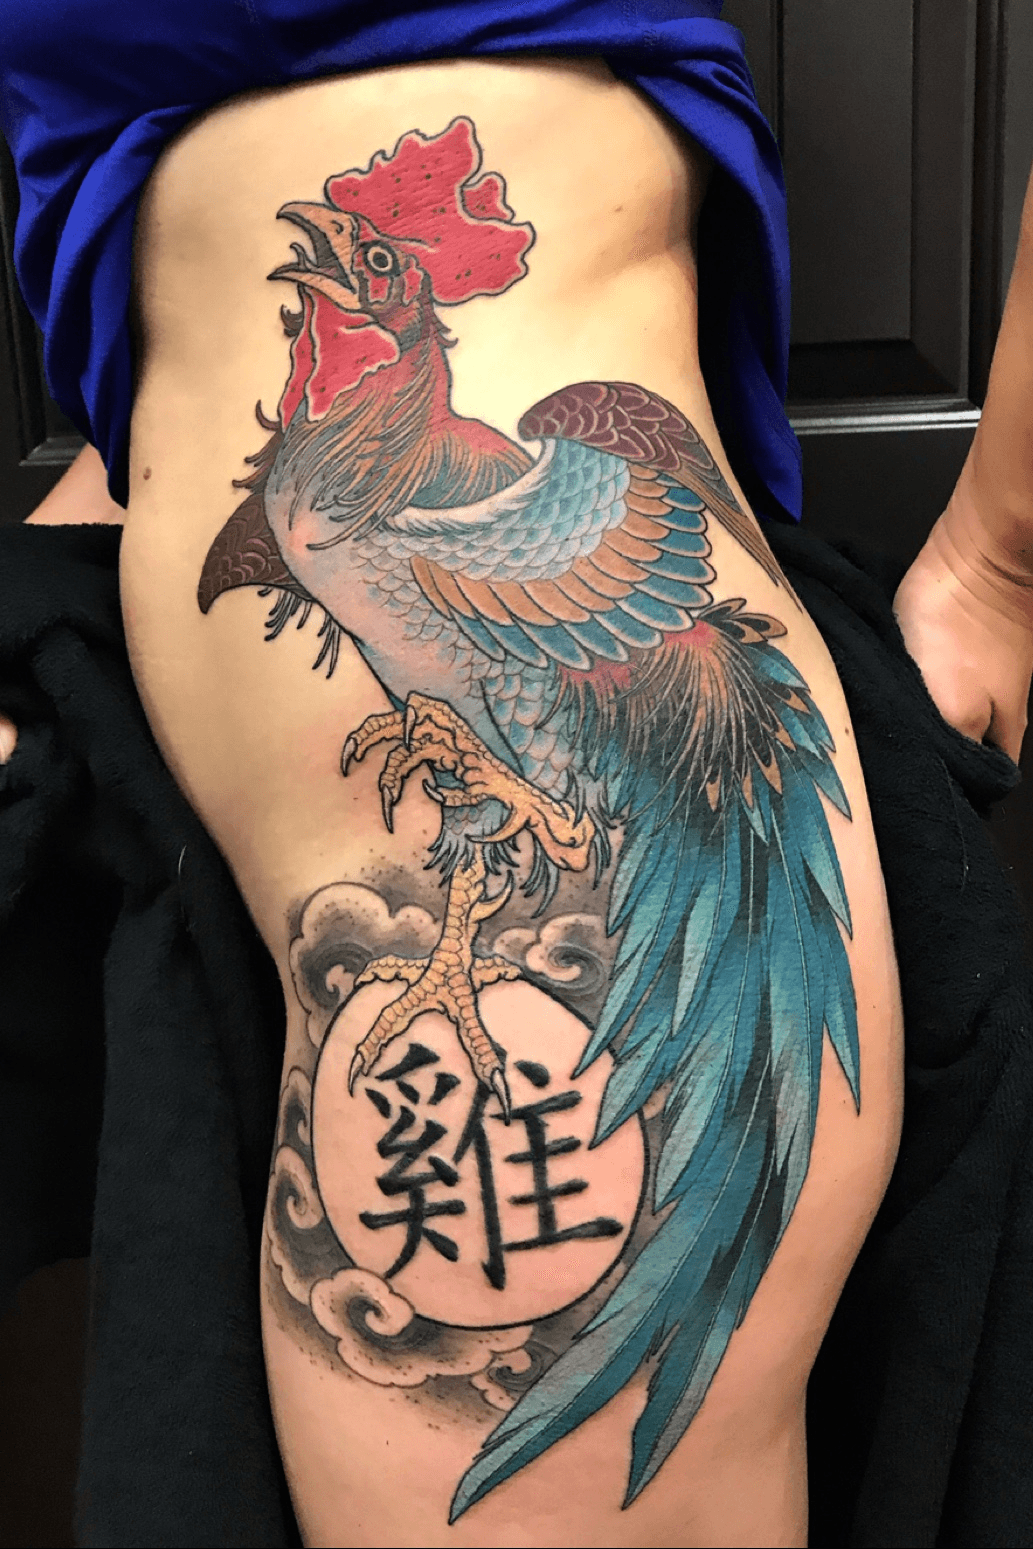 Happy New Lunar Year By Saki Blackwing  Year Of The Rooster Tattoo Designs  Transparent PNG  897x891  Free Download on NicePNG